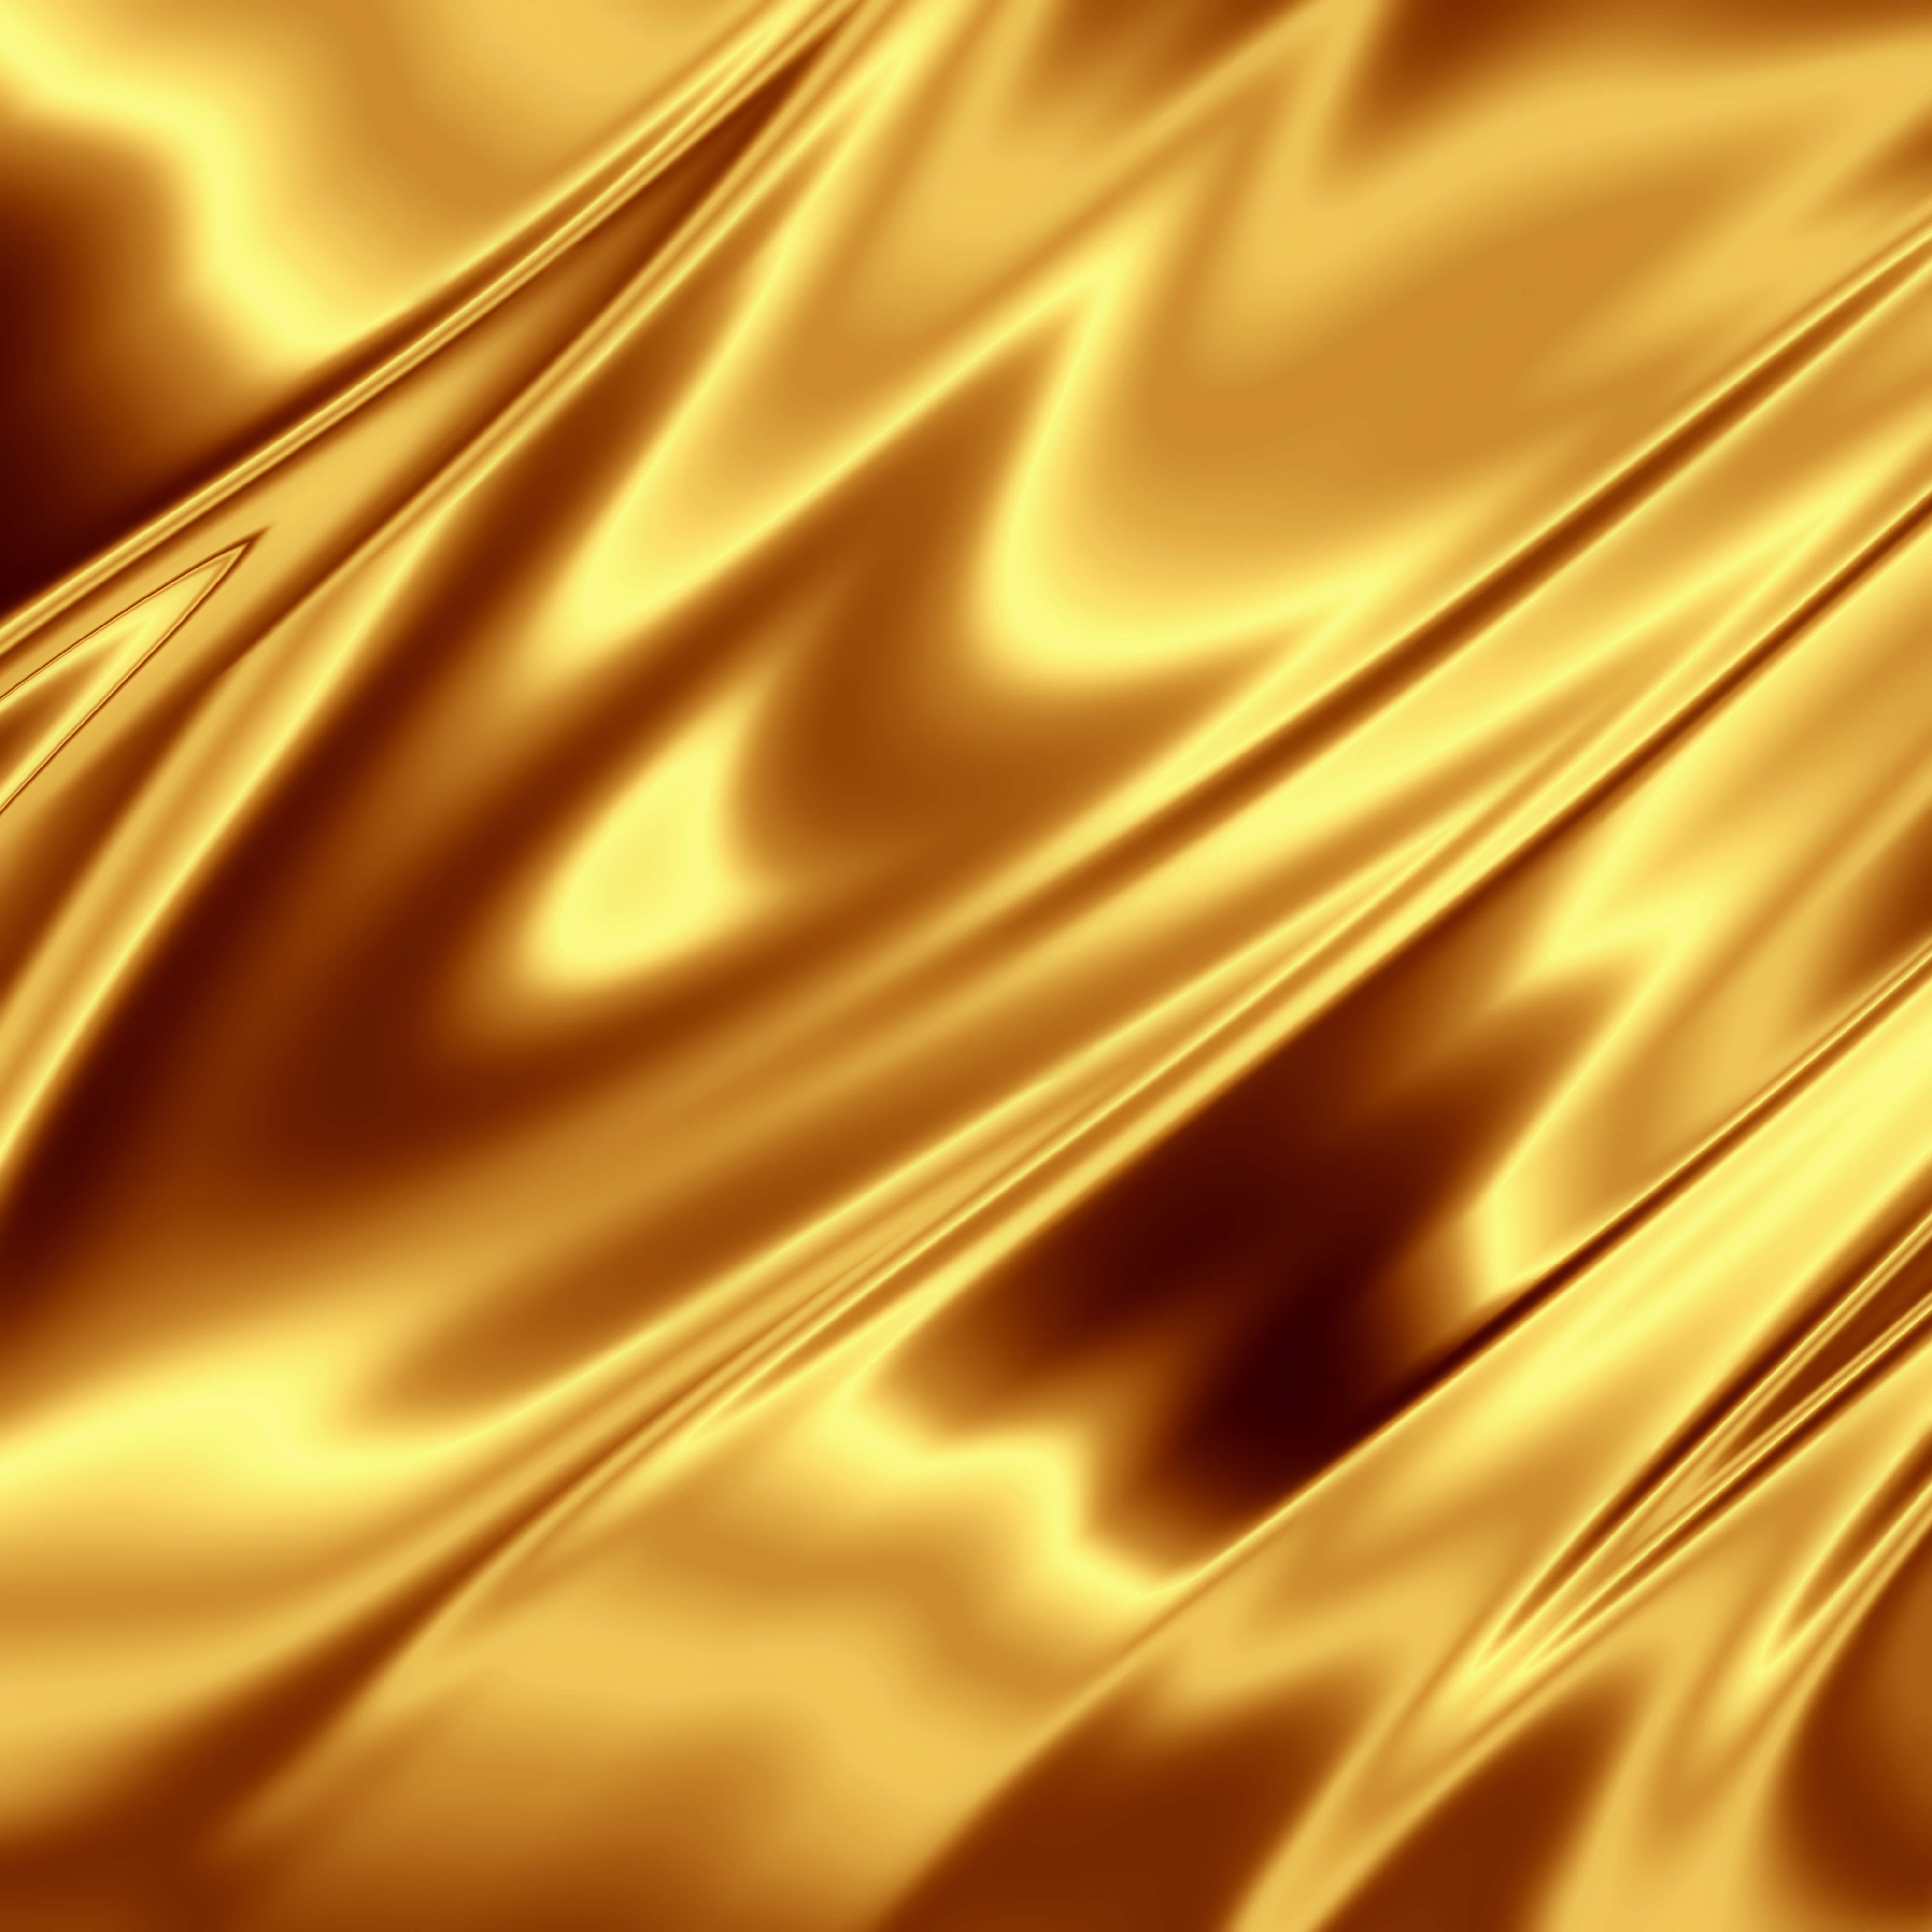 gold satin background gallery yopriceville high quality images and transparent png free clipart gallery yopriceville